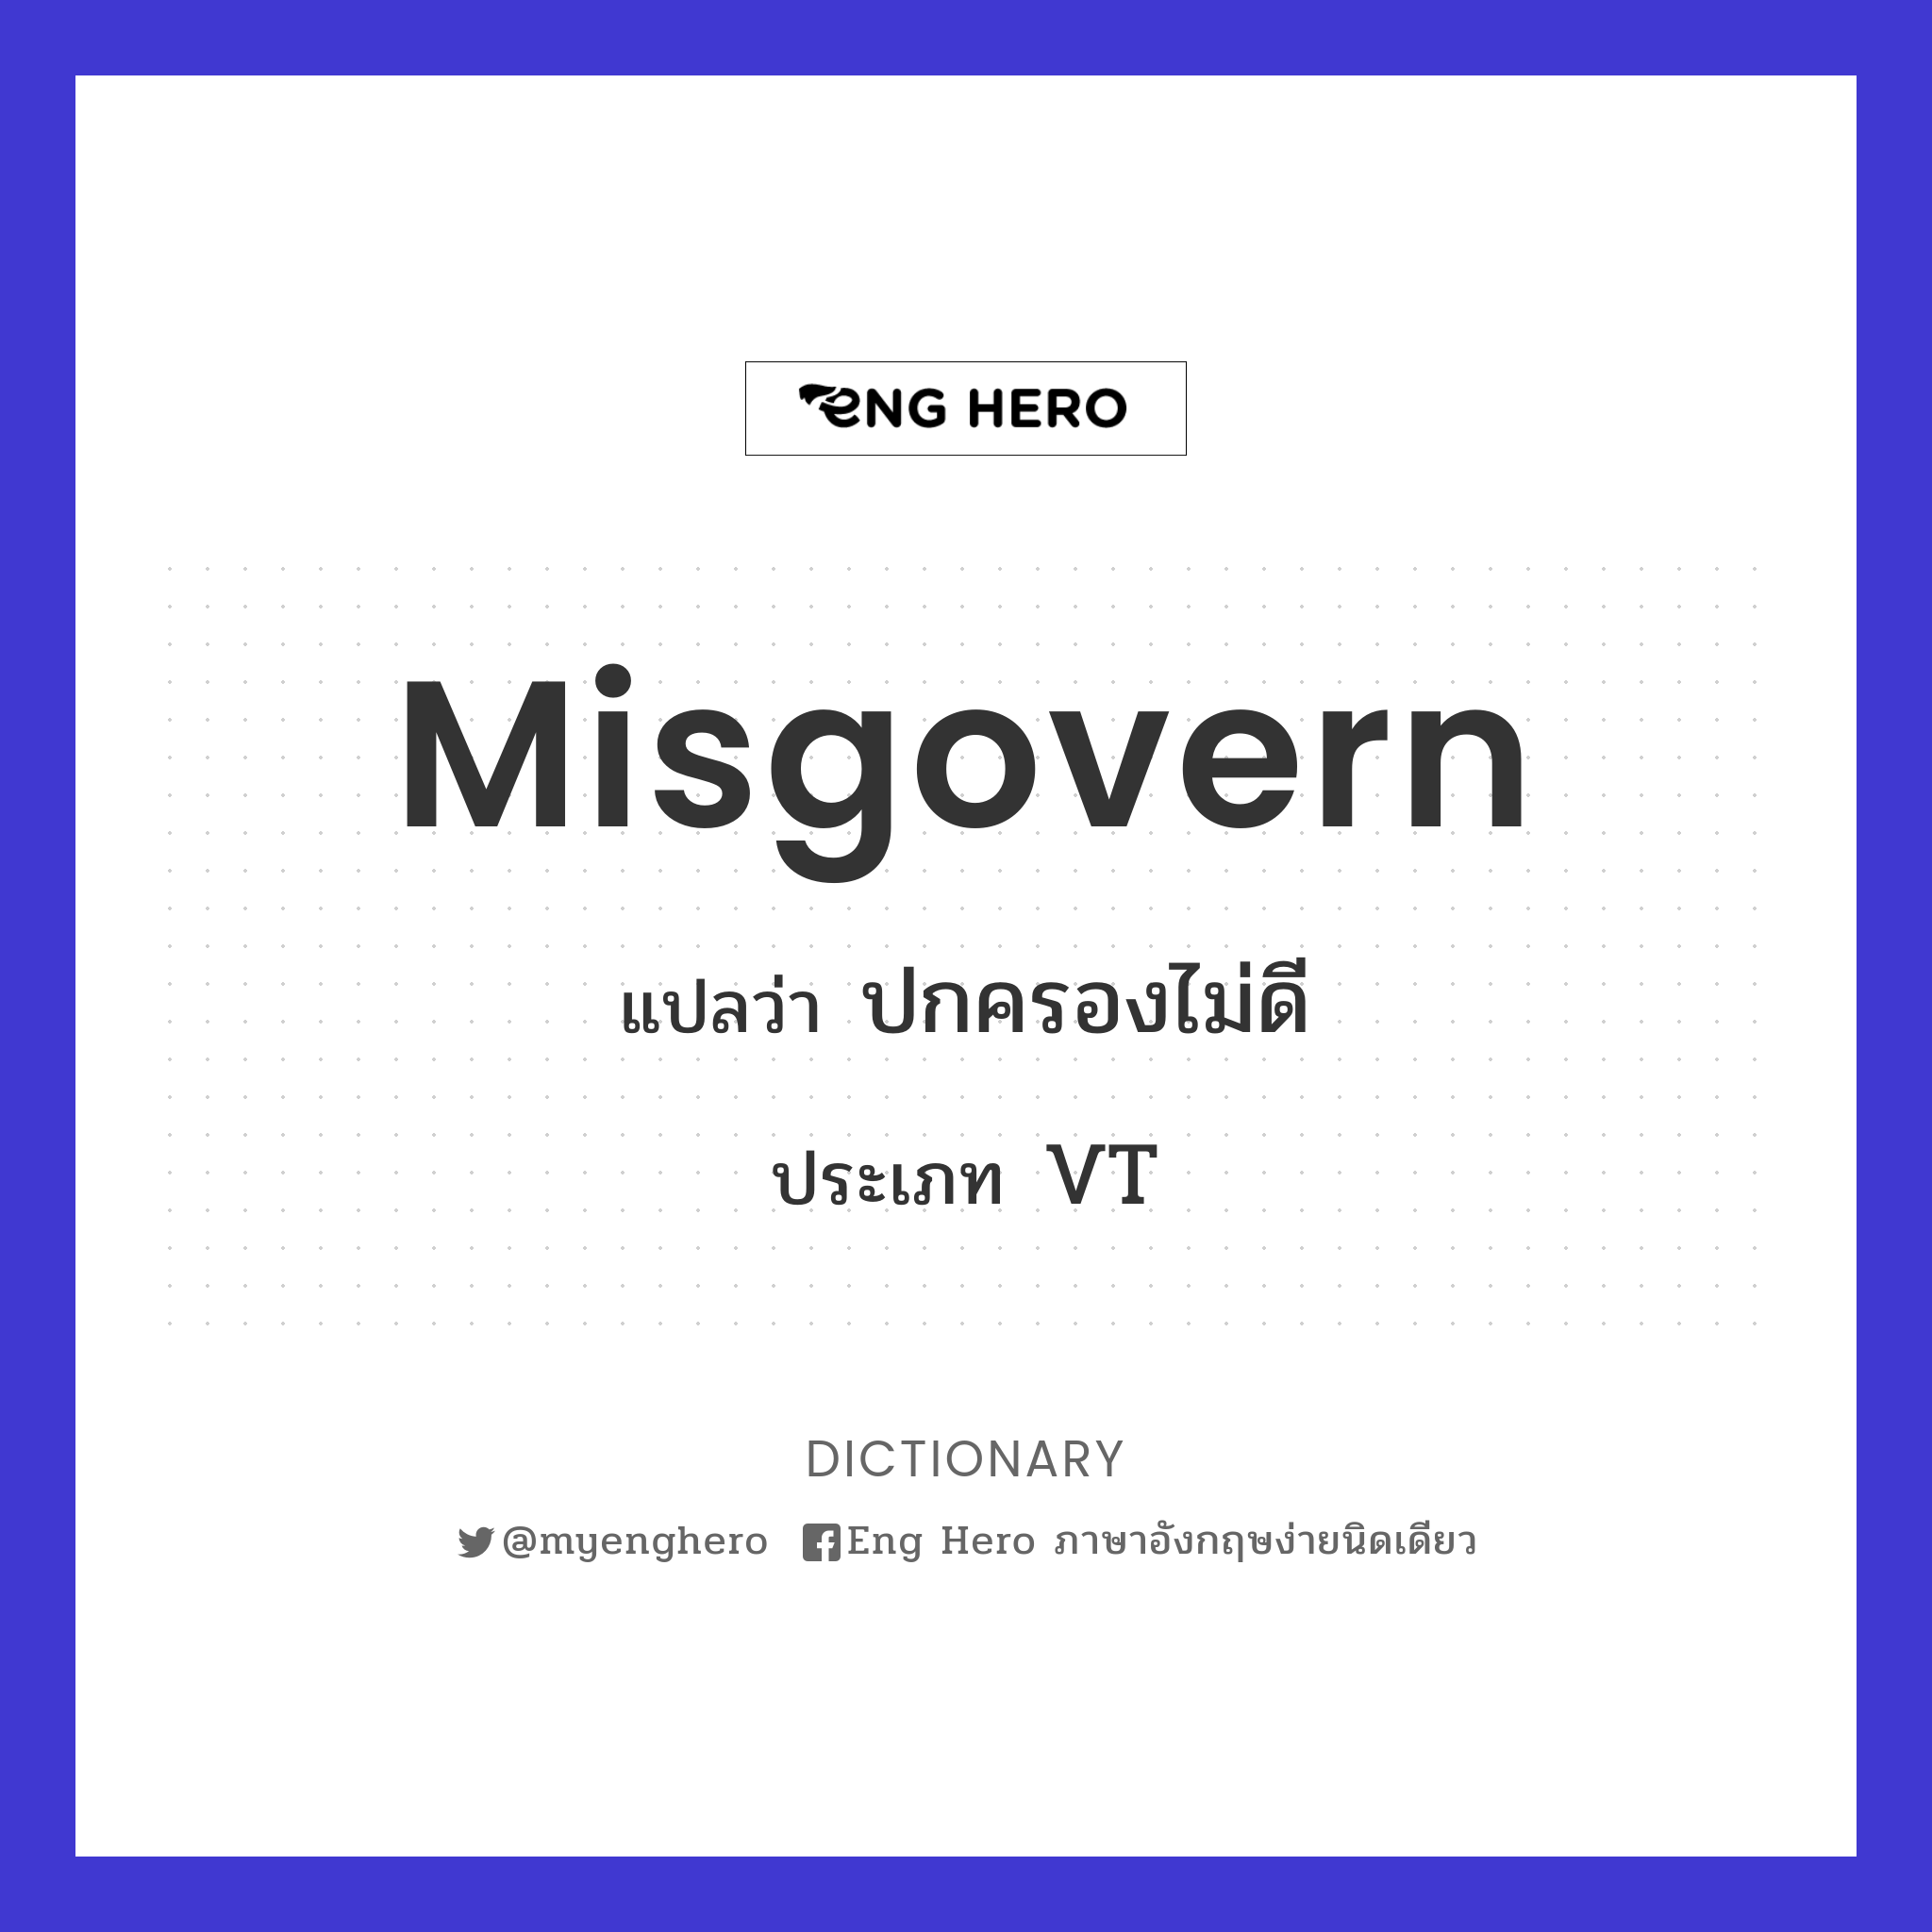 misgovern